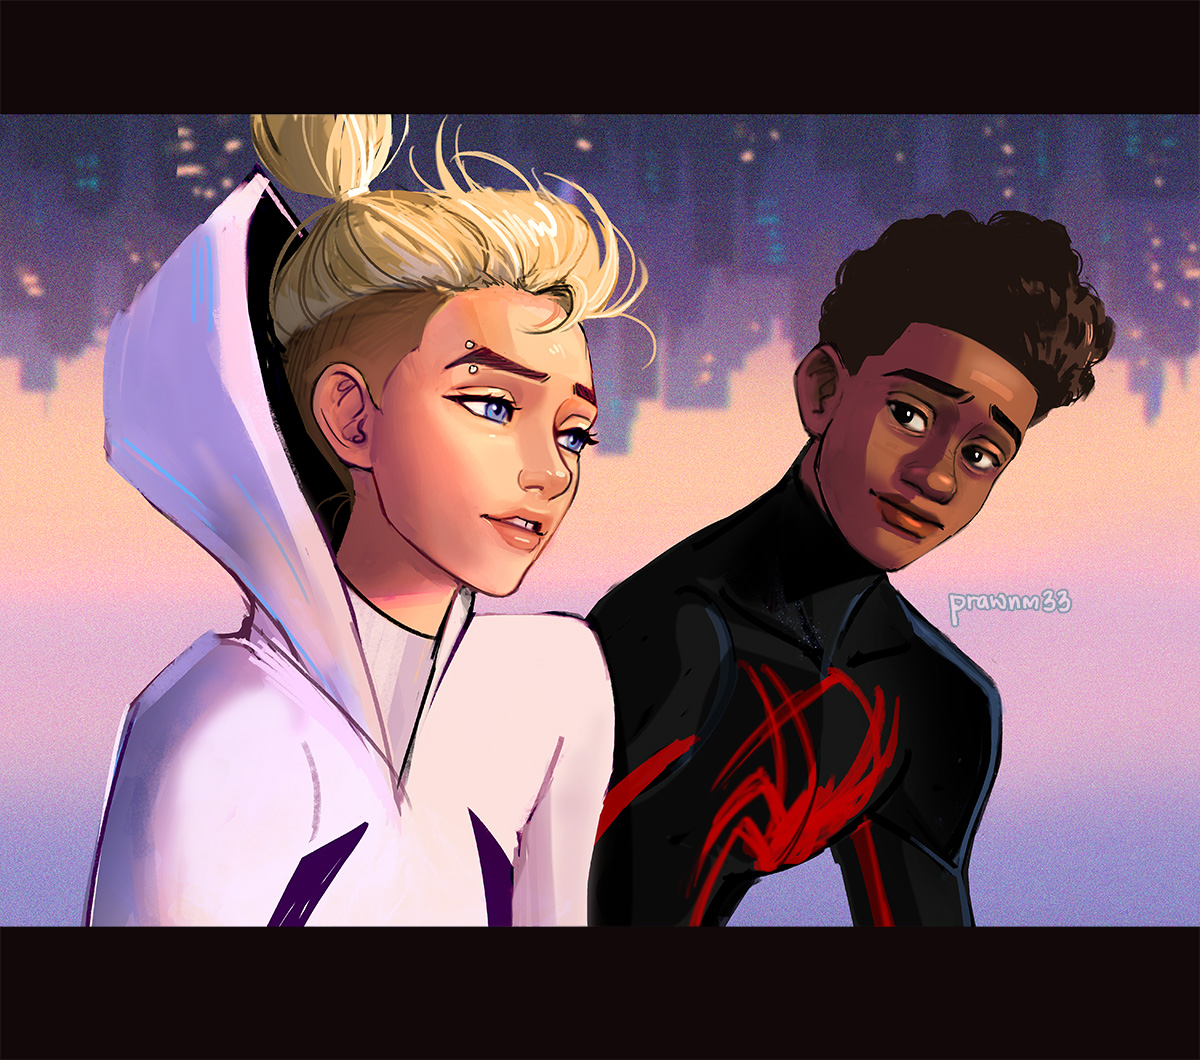 RT @mmmagnolia: In every other universe, Gwen Stacy falls for Spider-Man  #AcrossTheSpiderVerse https://t.co/MPZxwcBykx